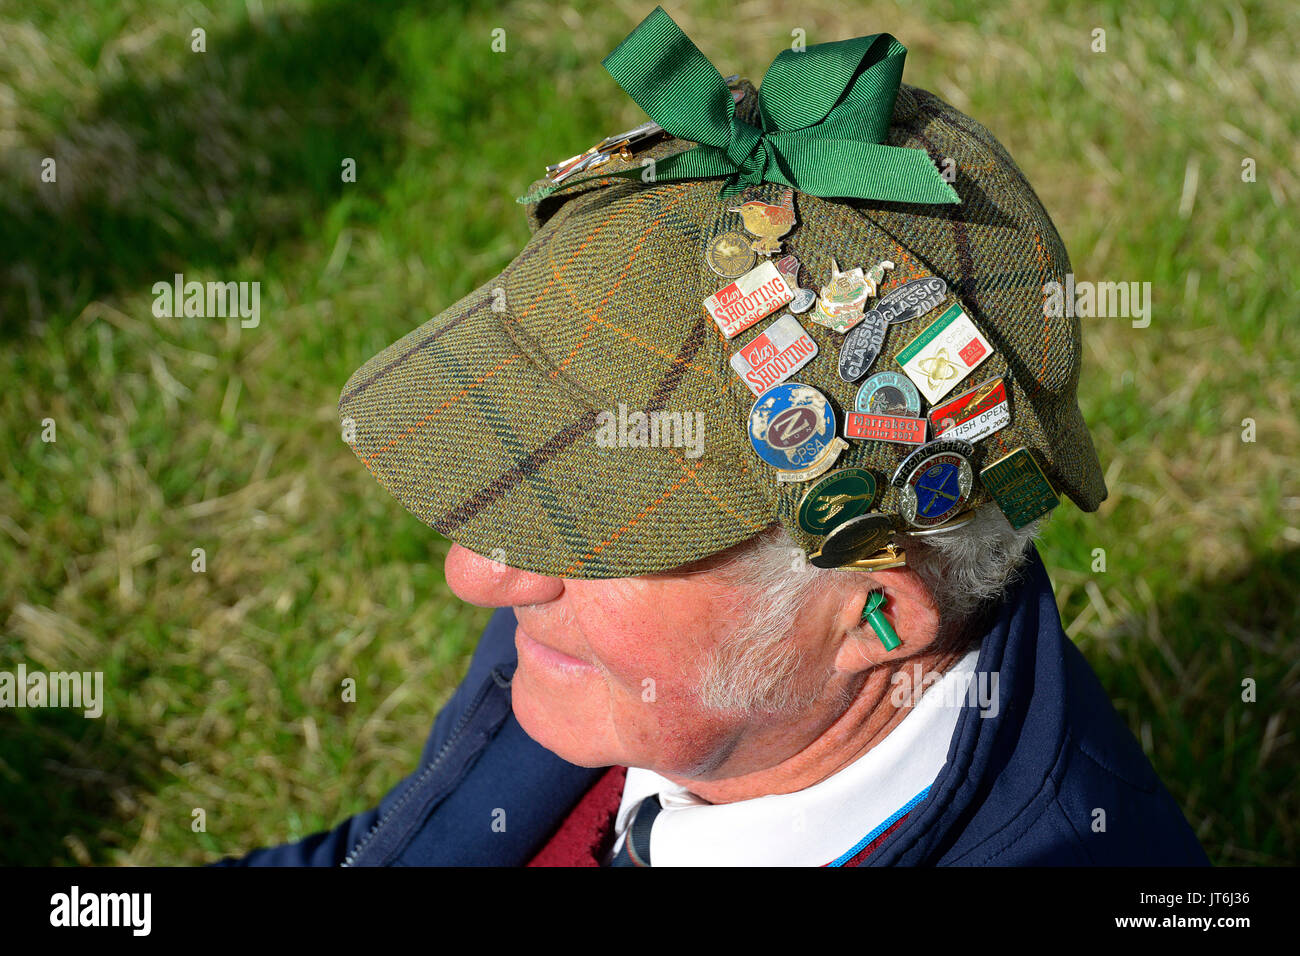 Badges on a deerstalker hat worn by a clay shooter Stock Photo